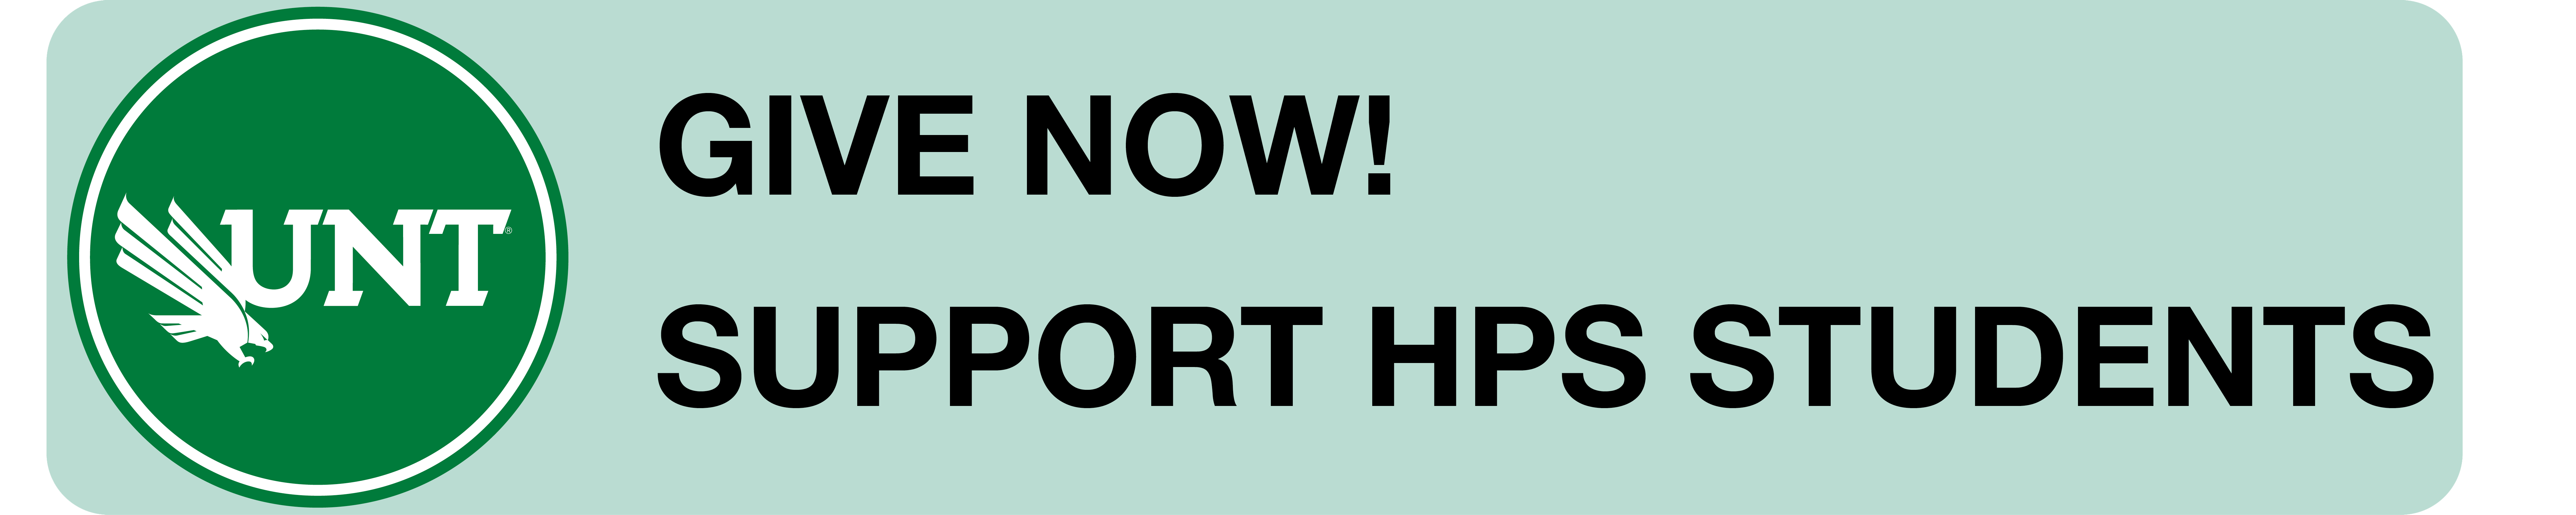 Give Now to HPS!